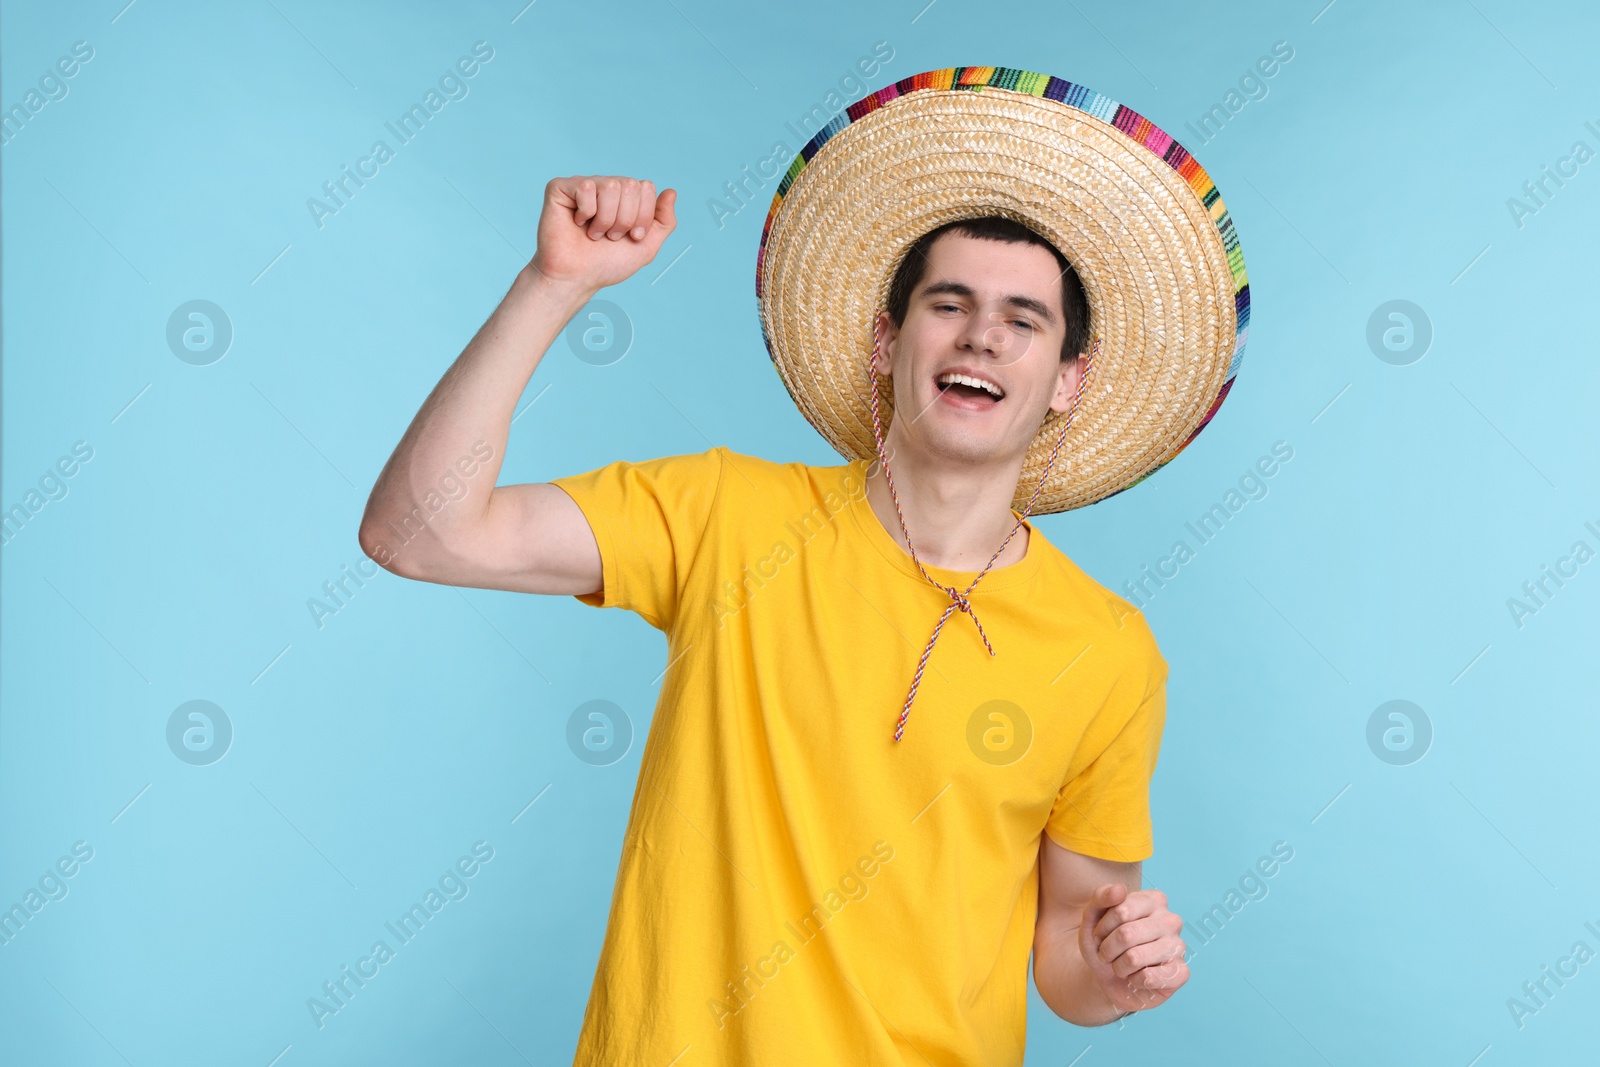 Photo of Young man in Mexican sombrero hat dancing on light blue background